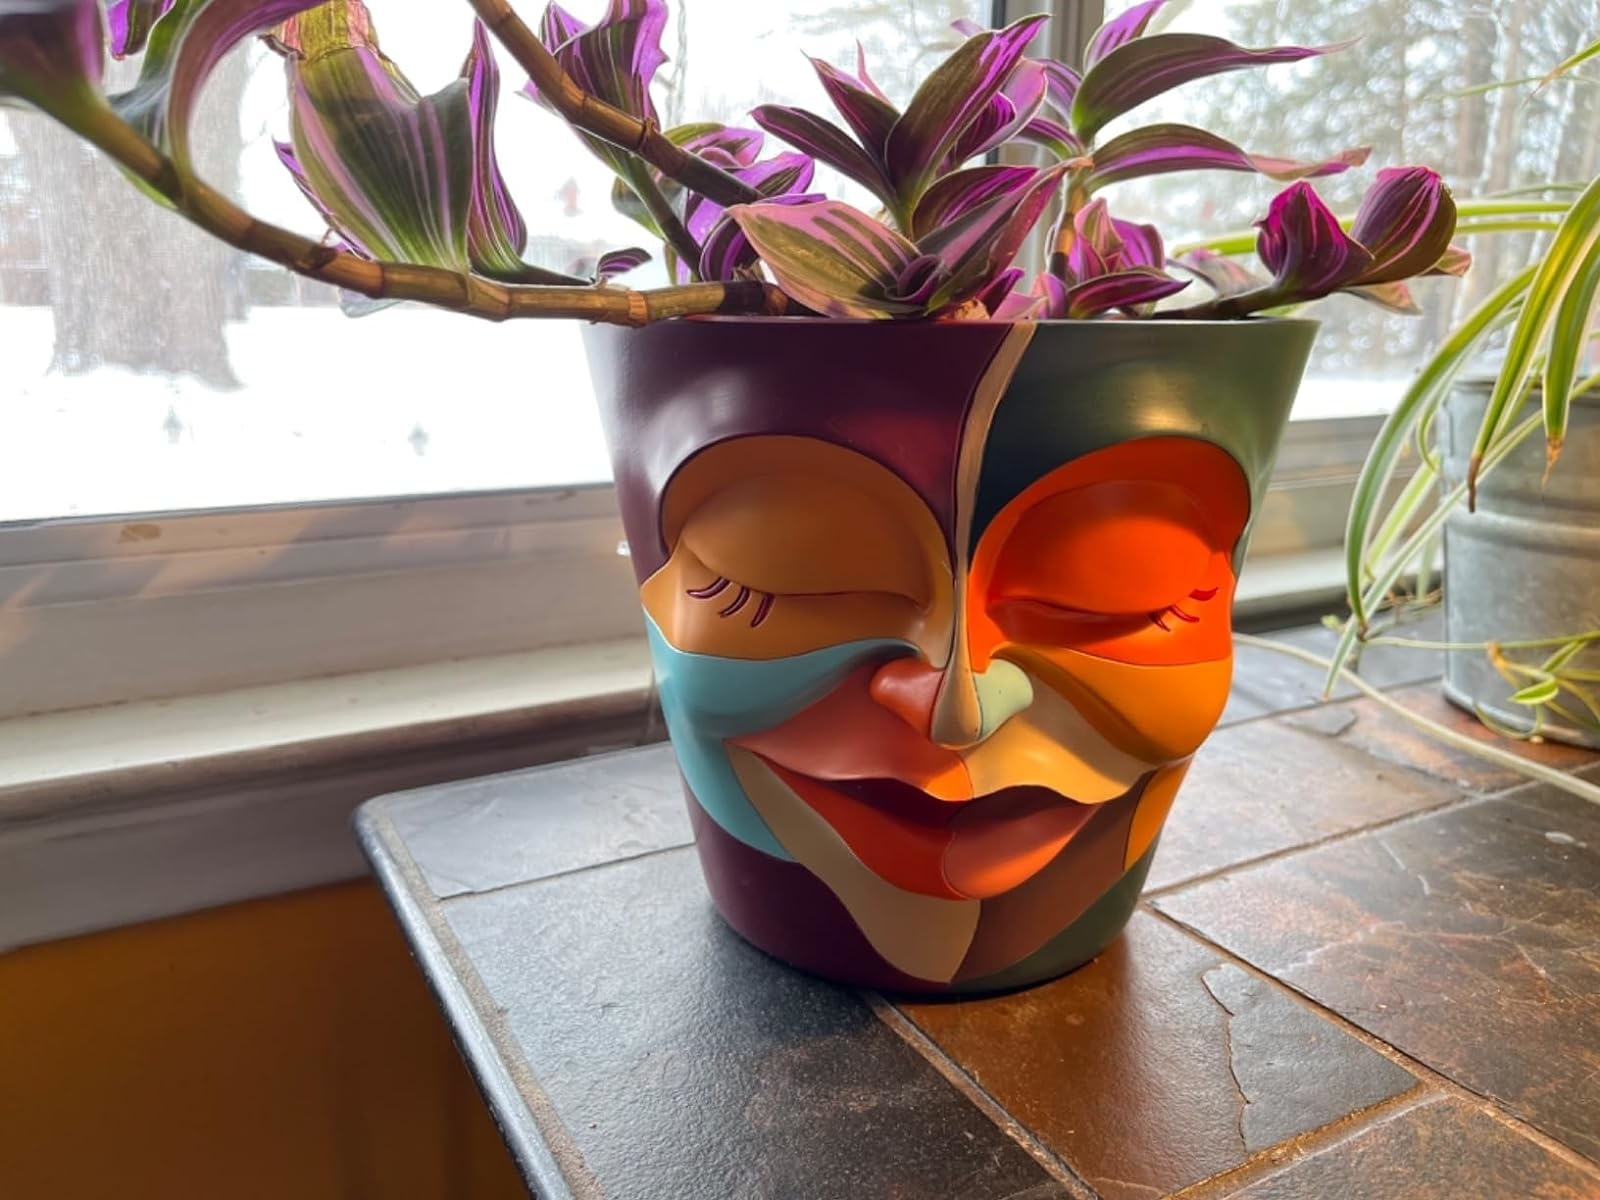 Smiling theatrical mask-themed planter with purple-leafed plant by a window, snow outside